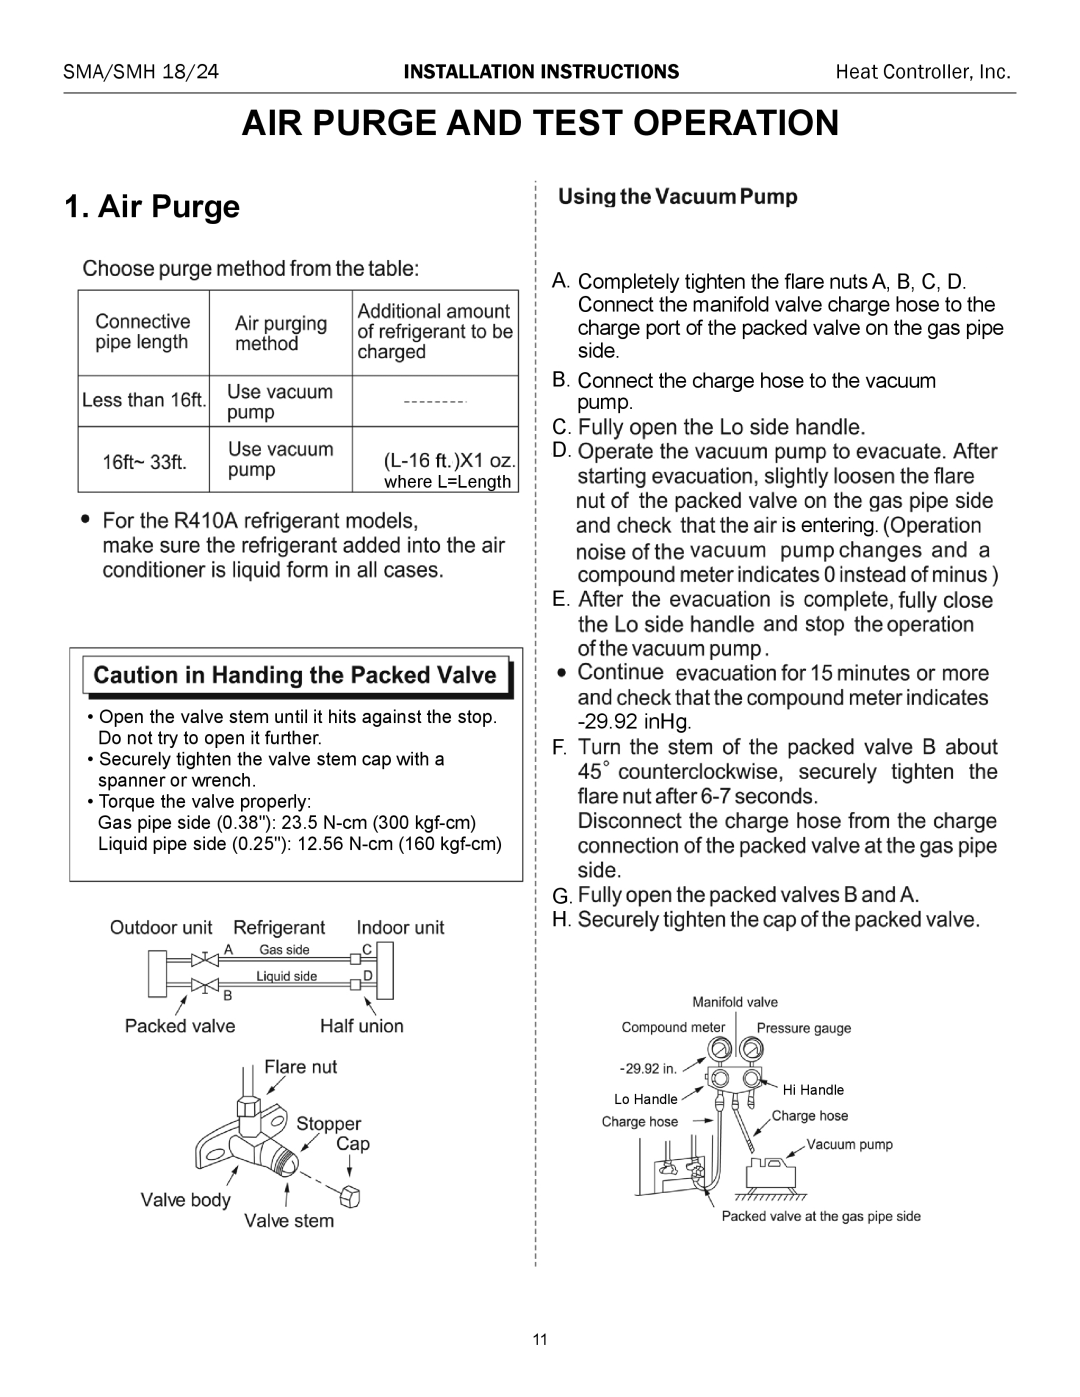 Heat Controller SMA/SMH 18/24 installation instructions Air Purge And Test Operation 